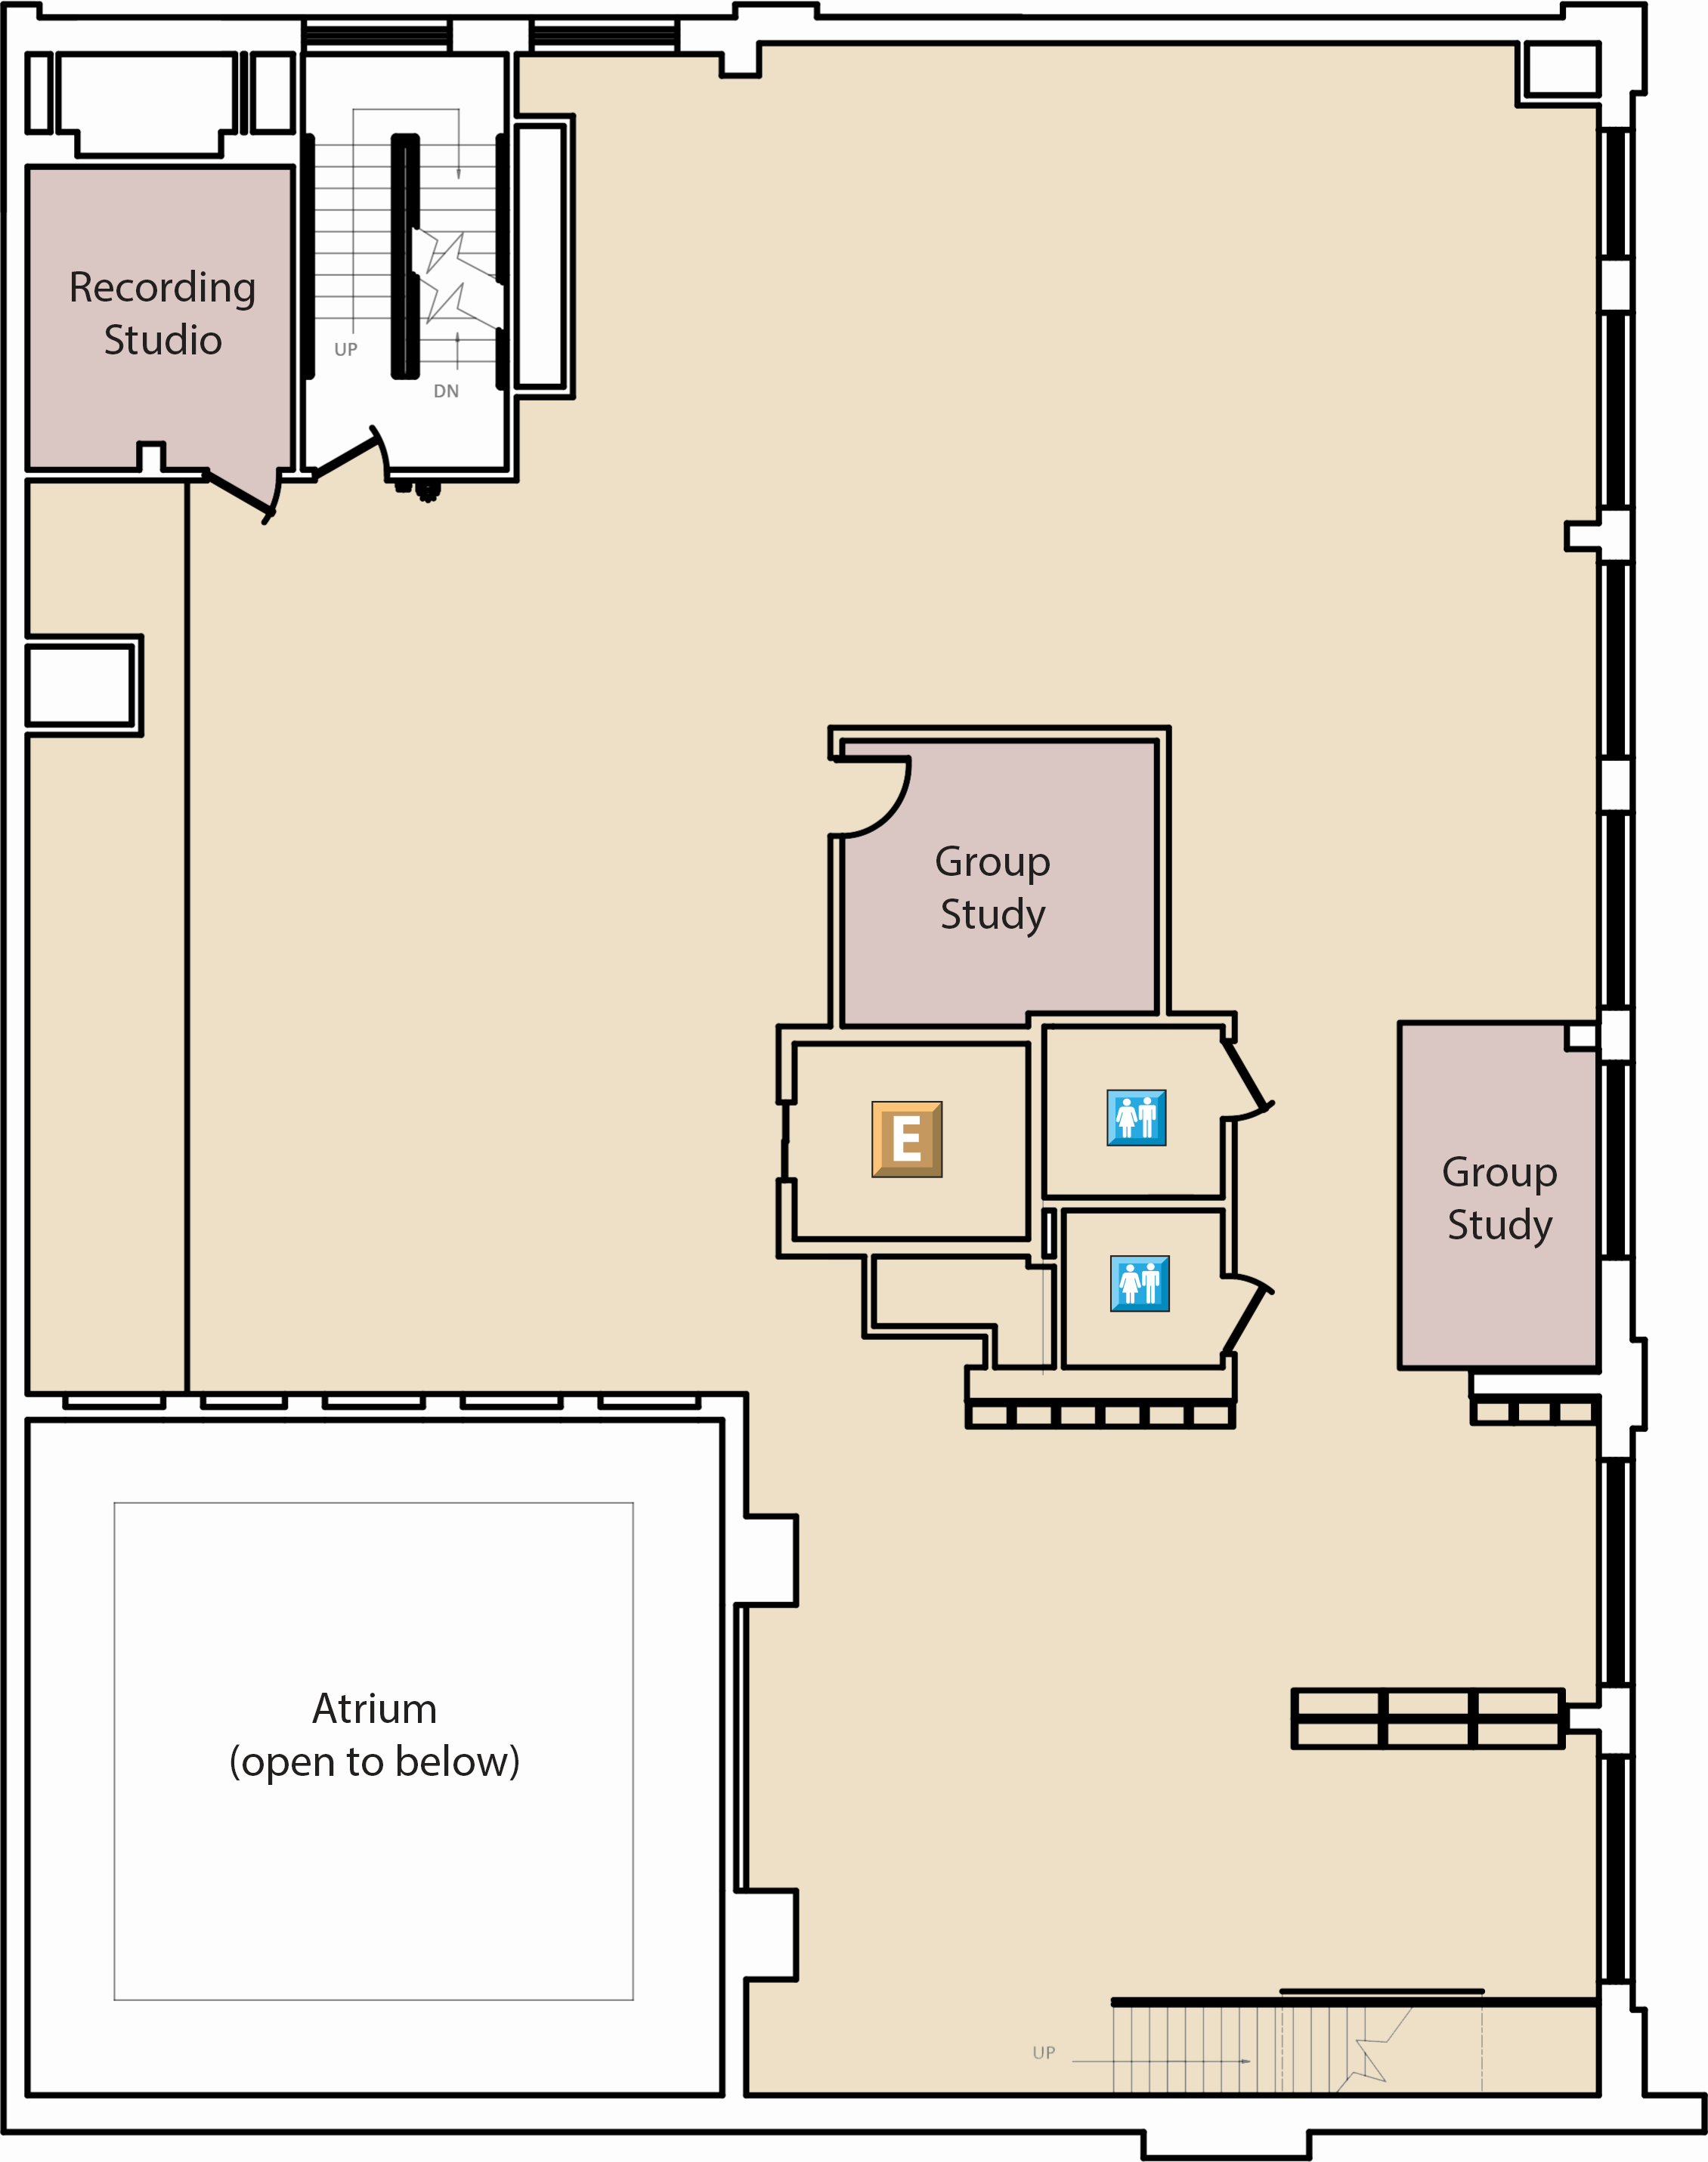 The Second Floor map is a map of the DeLaMare Library at the University of Nevada, Reno main campus showing all of the rooms and features of the Second Floor of the DeLaMare Library.  Getting to the second floor of the DeLaMare Library The second floor of the DeLaMare Library includes an entrance facing north. There is an elevator in the middle of the basement and first-floor area and a set of stairs on the north end that lead to the upper floors of the DeLaMare Library.  Features of the Second Floor The second floor includes Recording Studio room to the west of the north staircase entrance.  There are two Group study rooms; one is located towards the center and the other towards the east of the group study room located in the center.  Also located in the center of the second-floor are two gendered restrooms. Directly west of the bathrooms is a public elevator.  The Atrium is open to below (first floor) and is southwest of the second floor.  On the south end of the second-floor, there is an alternative staircase that leads up to the third floor.